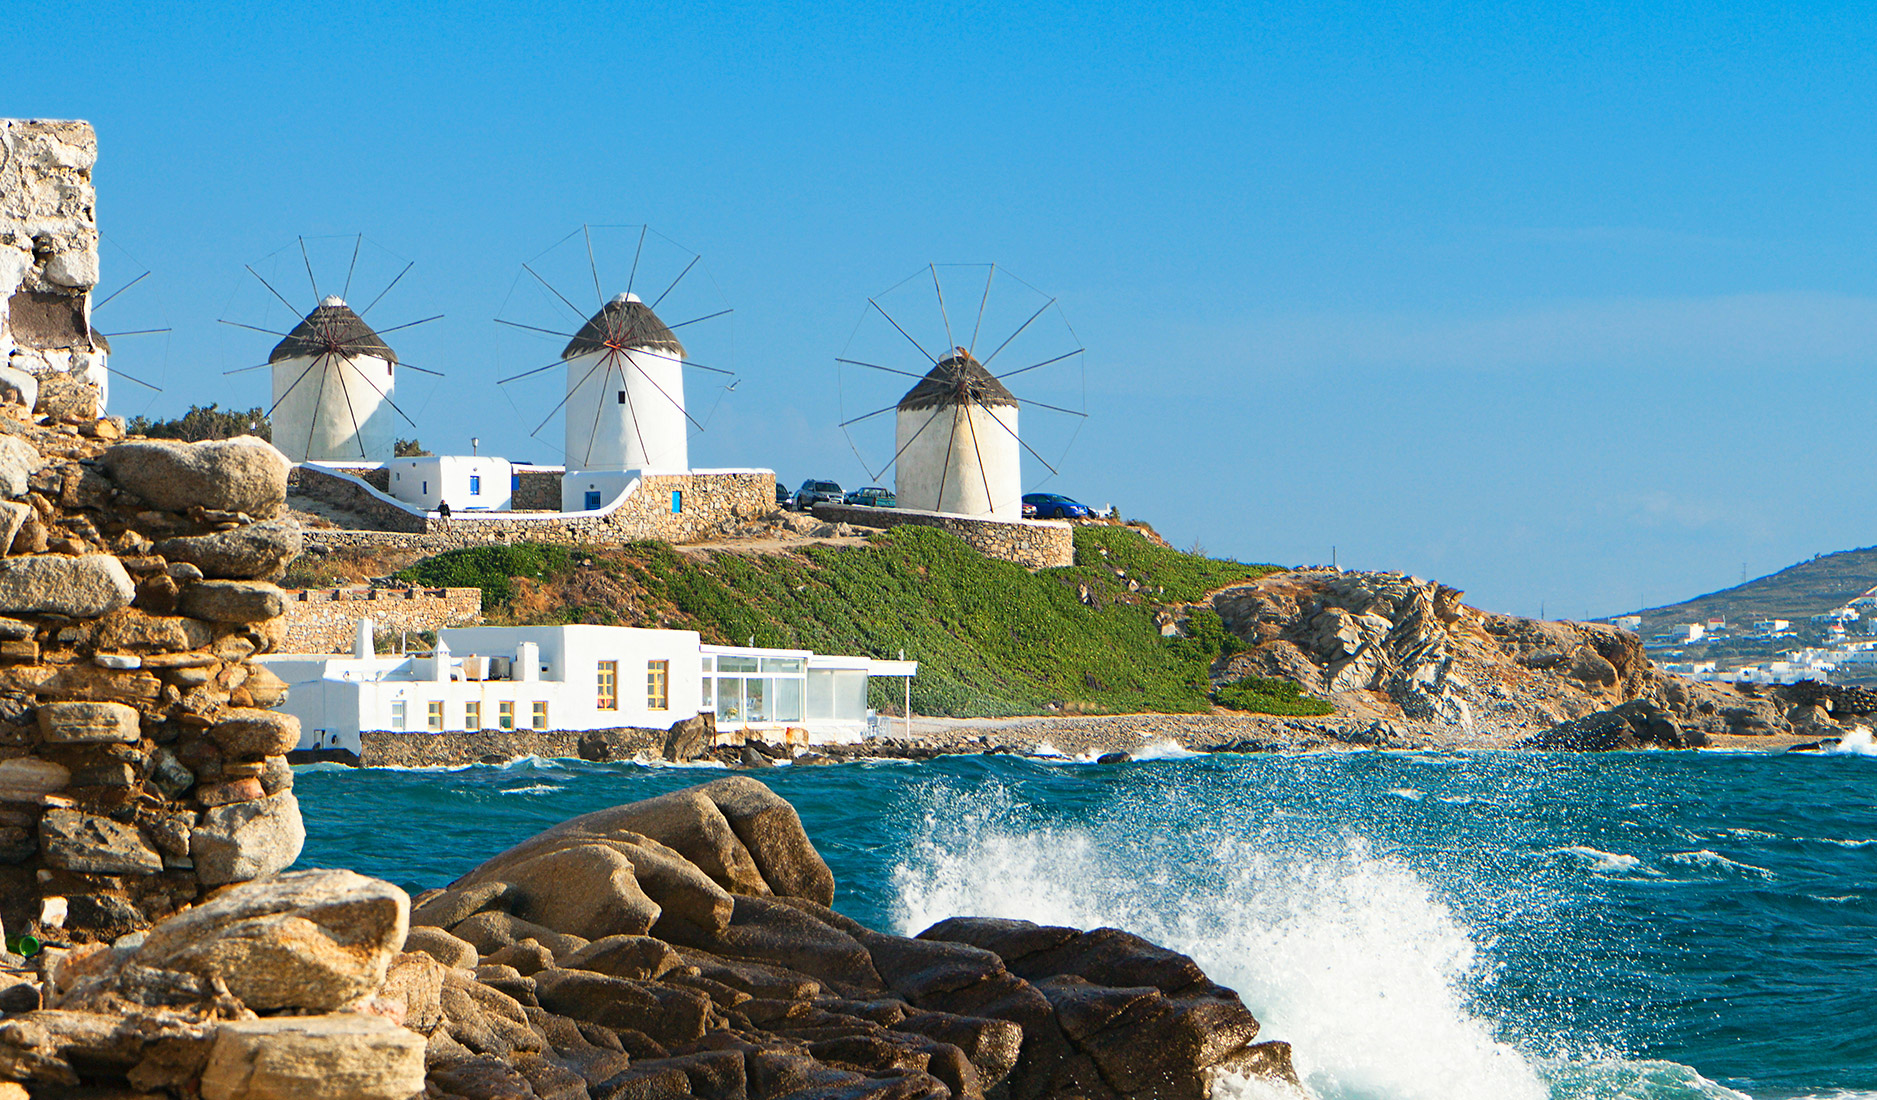 Mykonos Windmills - Turquoise waters, a refreshing sea breeze, and a majestic skyline adorned with the iconic Mykonos Windmills